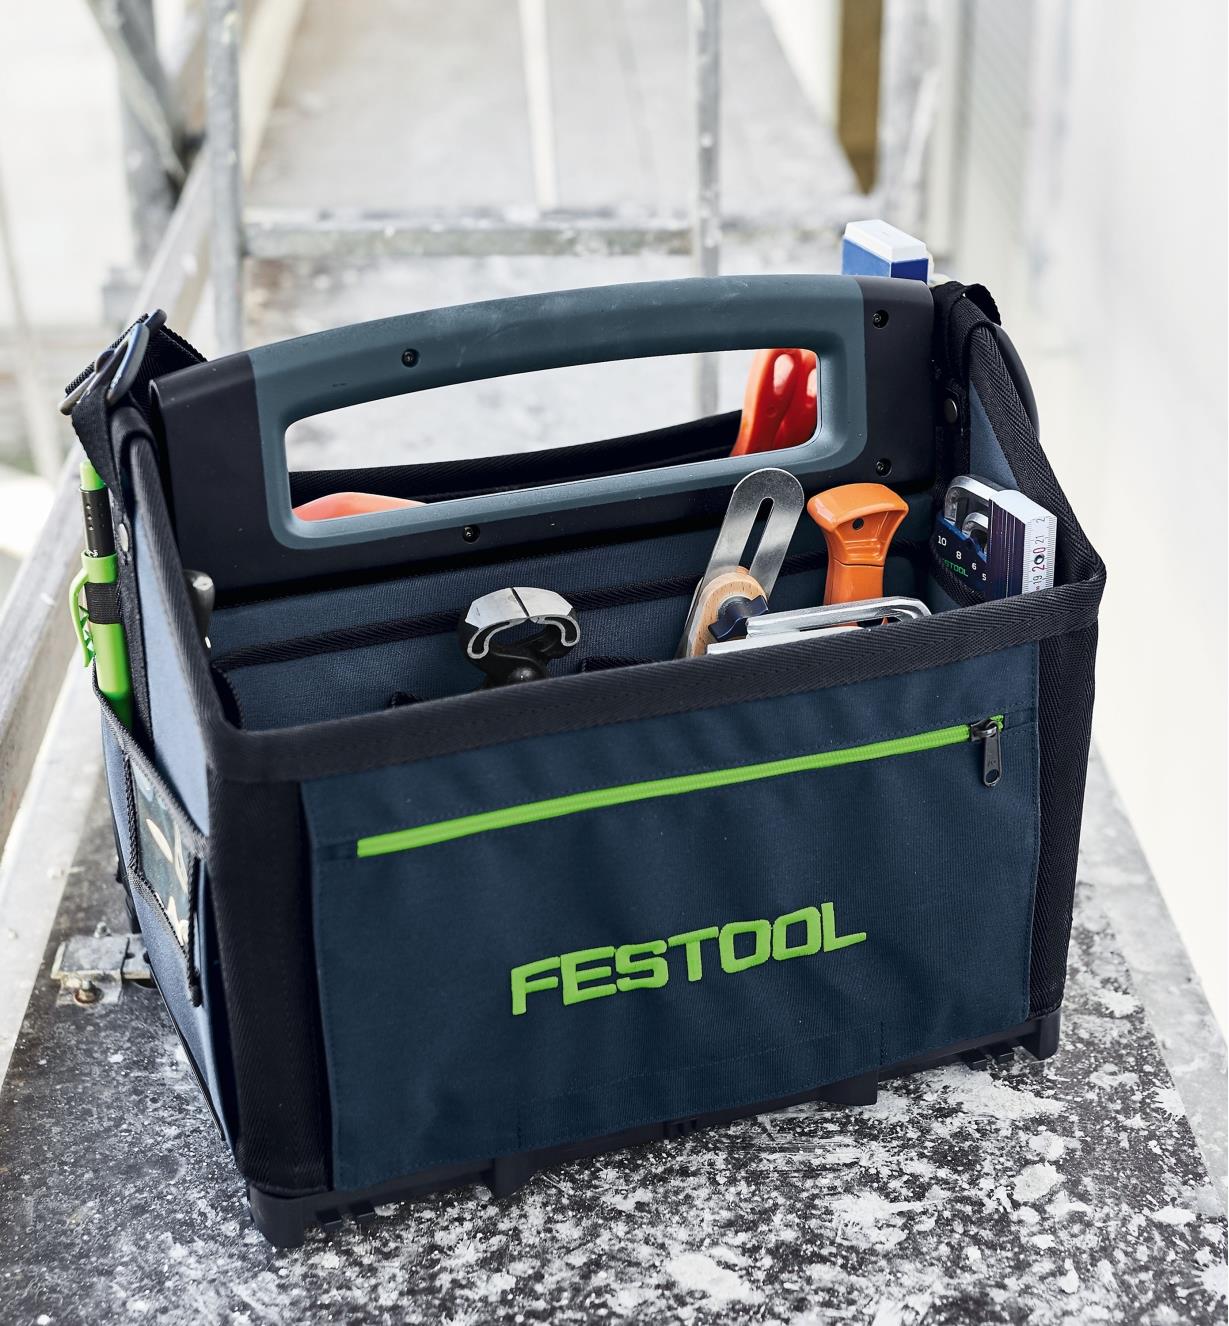 Sac à outils Systainer³ SYS3 T-BAG Festool